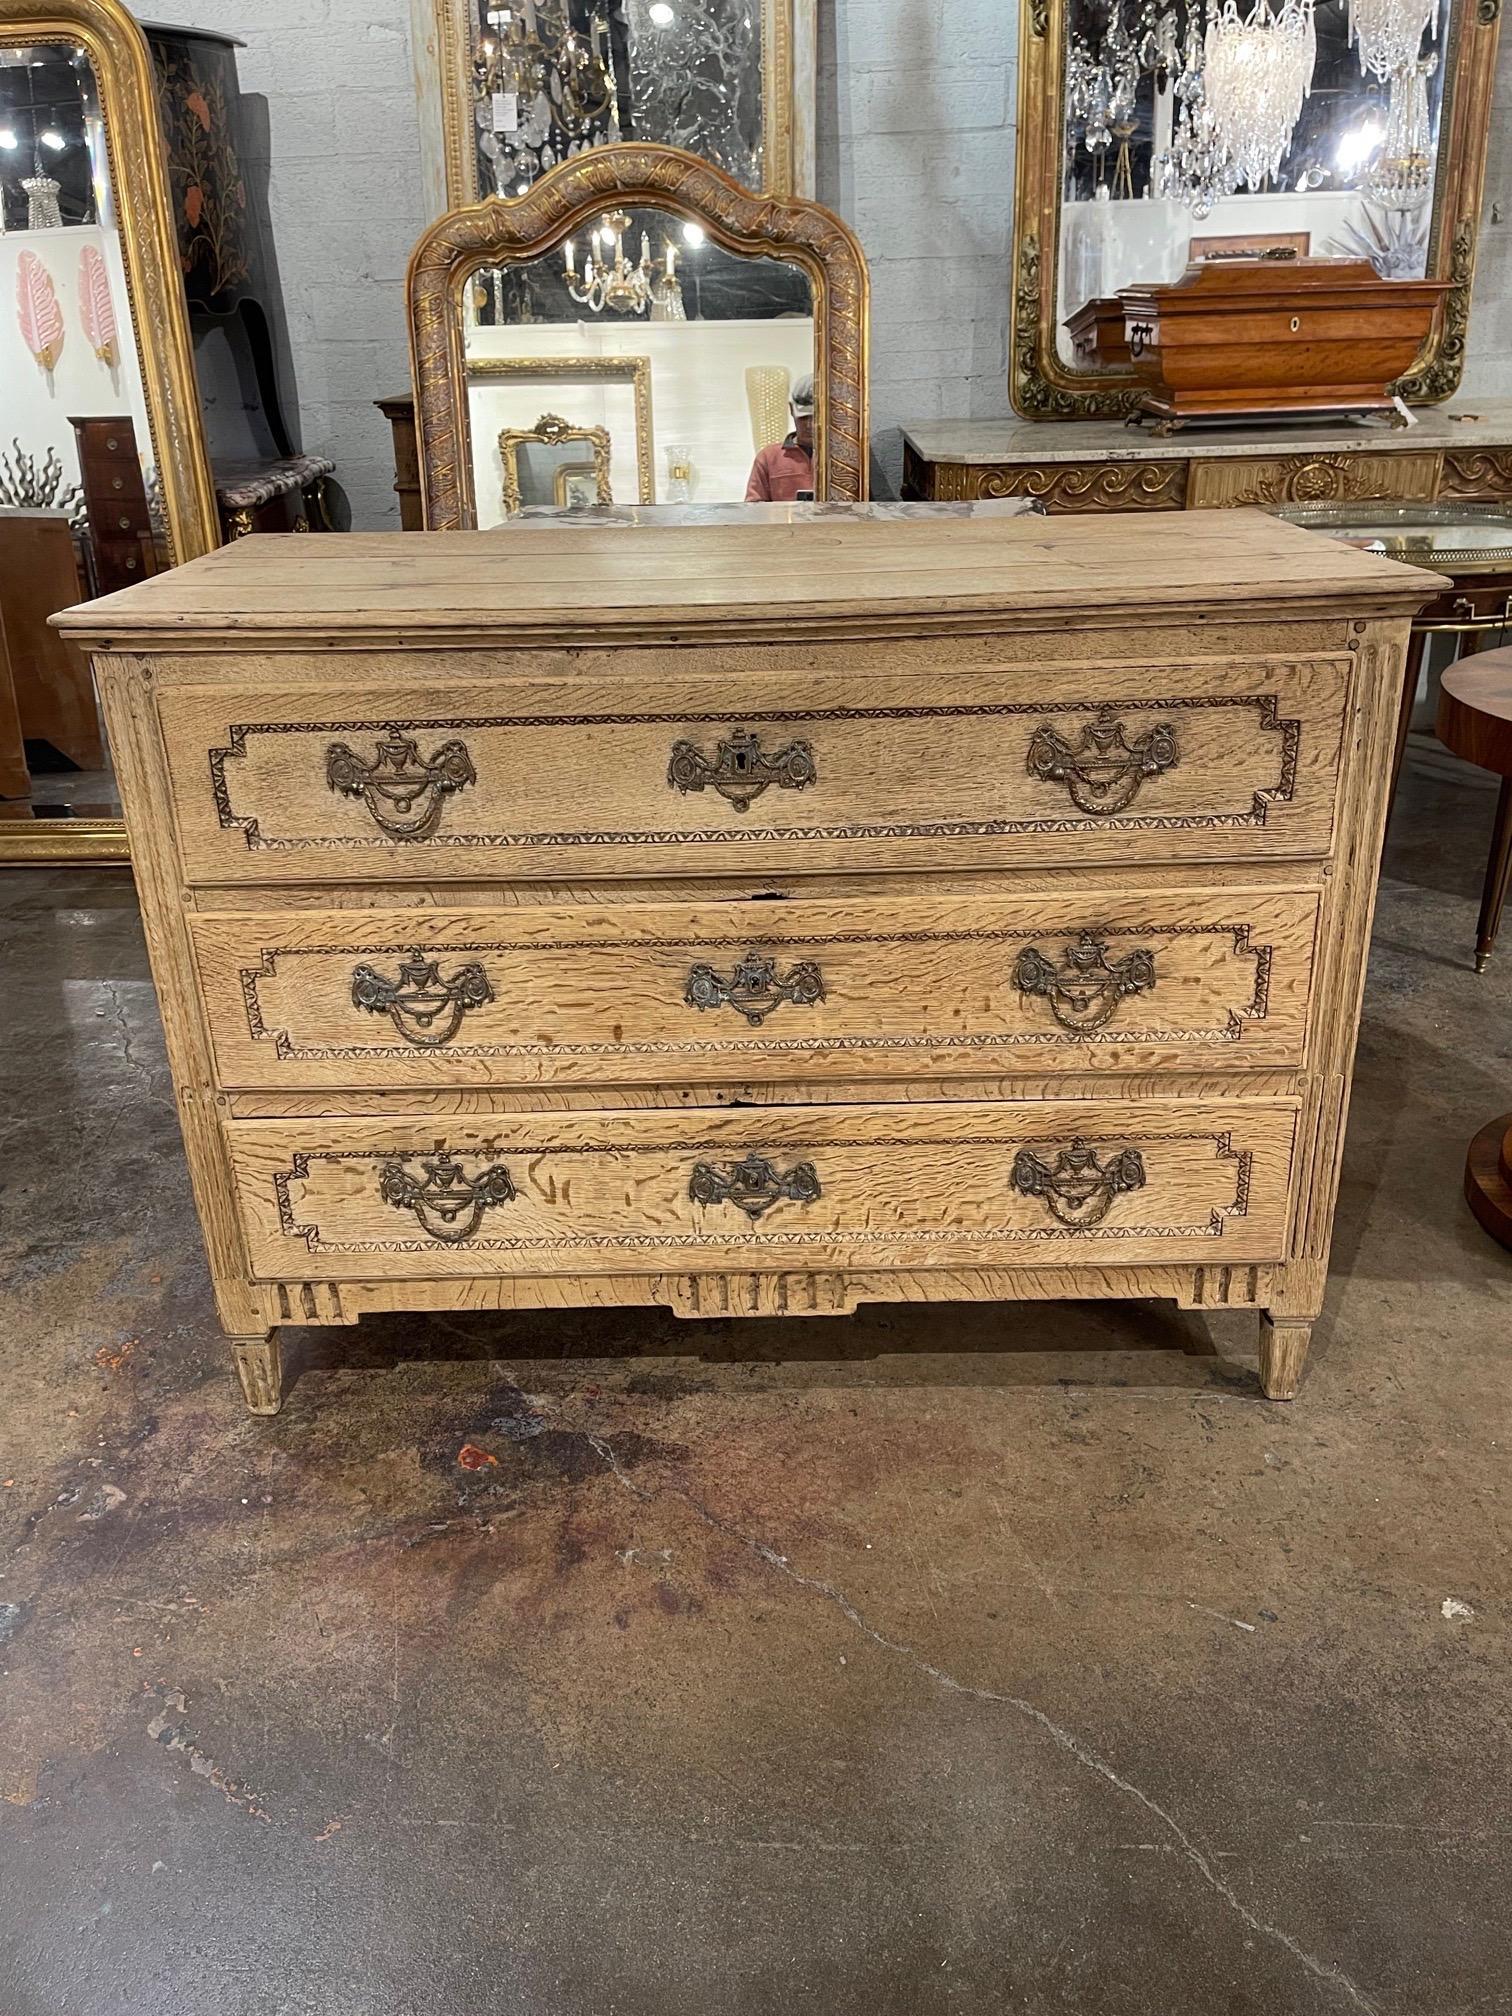 Very nice 18th century French carved and bleached white oak commode. Lovely patina and tons of storage. Great for the modern farmhouse look!.